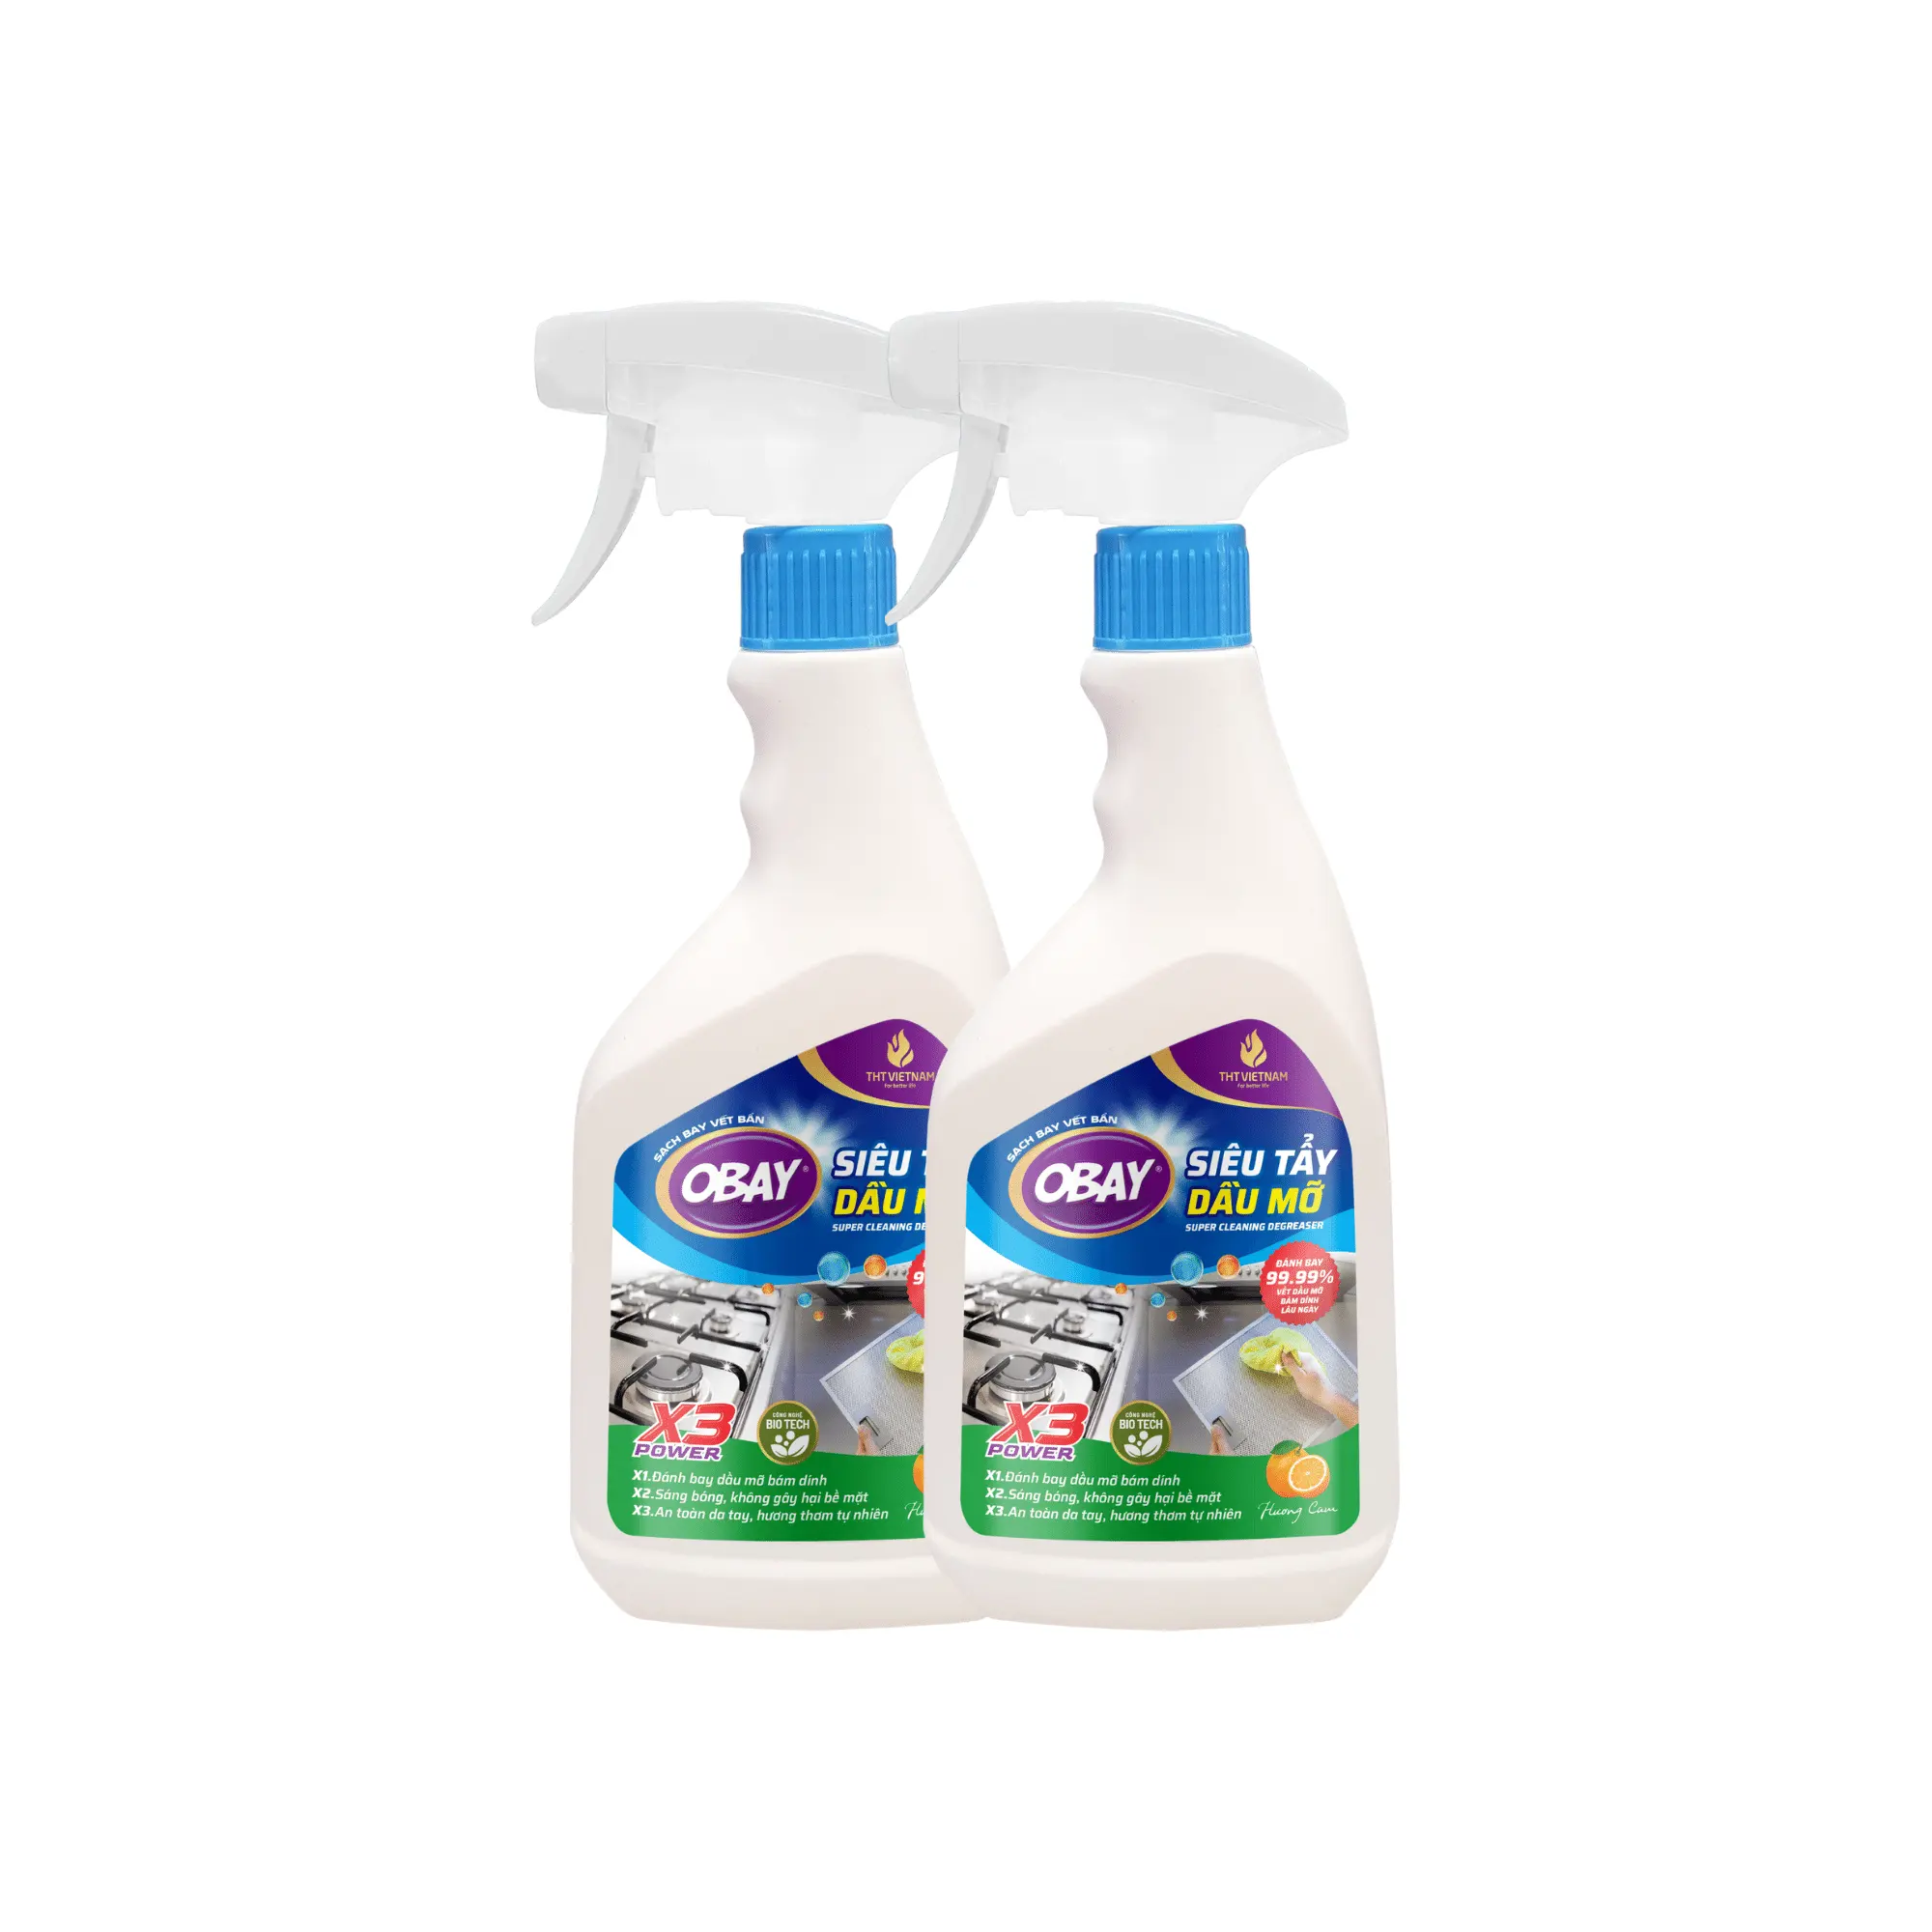 Obay 450ml Kitchen Degreaser Spray for Removing Oil Stains Cleaners Product